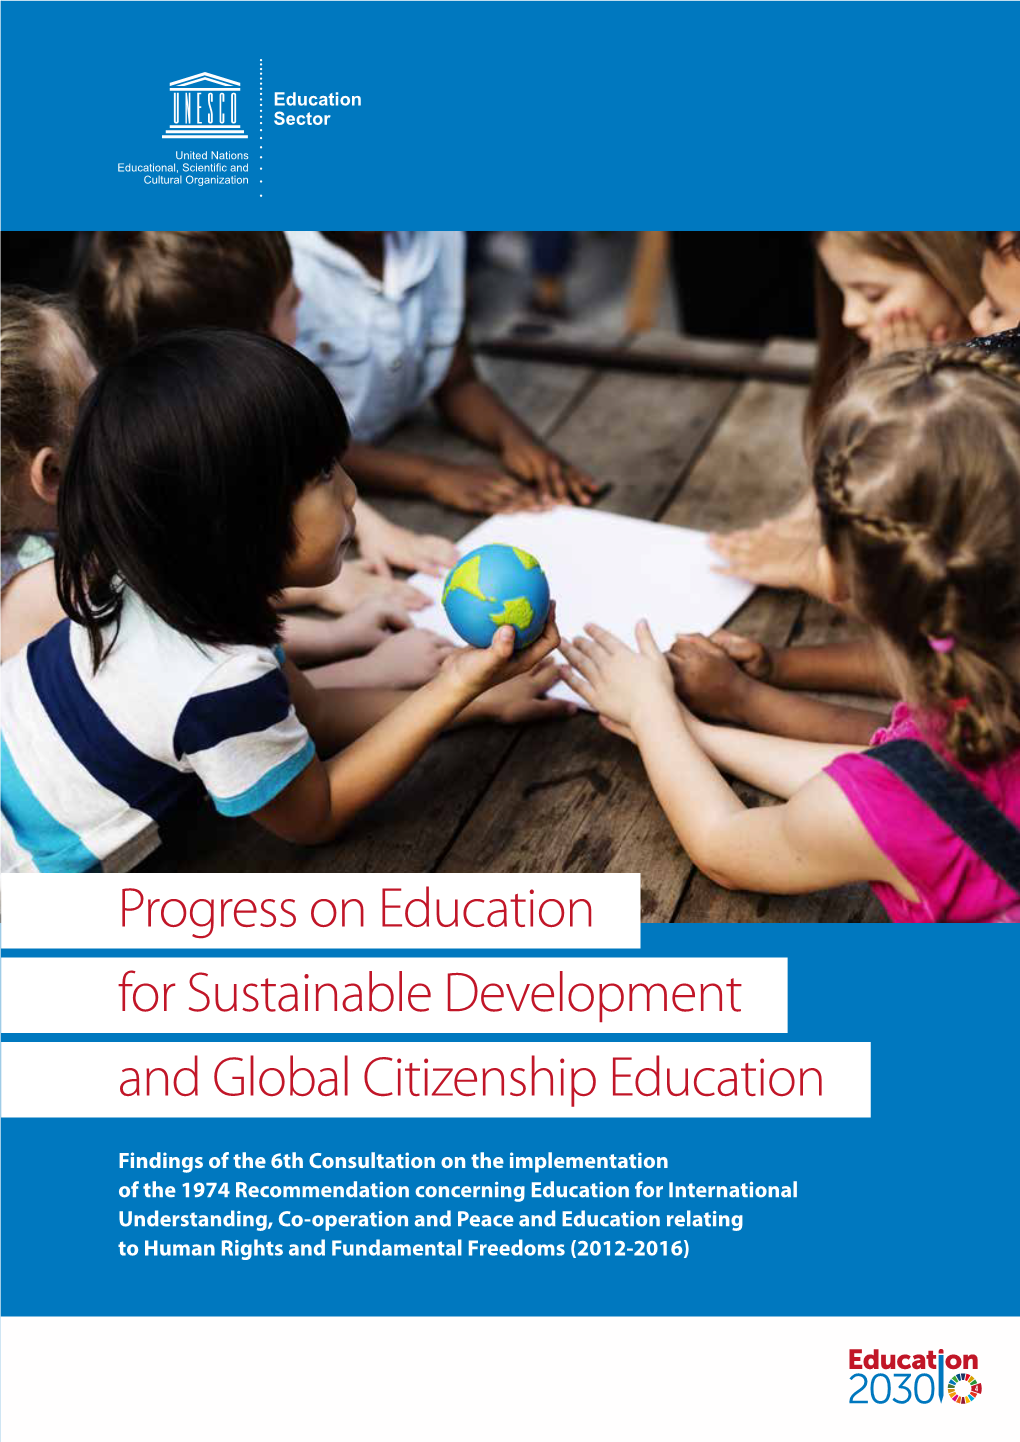 Progress on Education for Sustainable Development and Global Citizenship Education